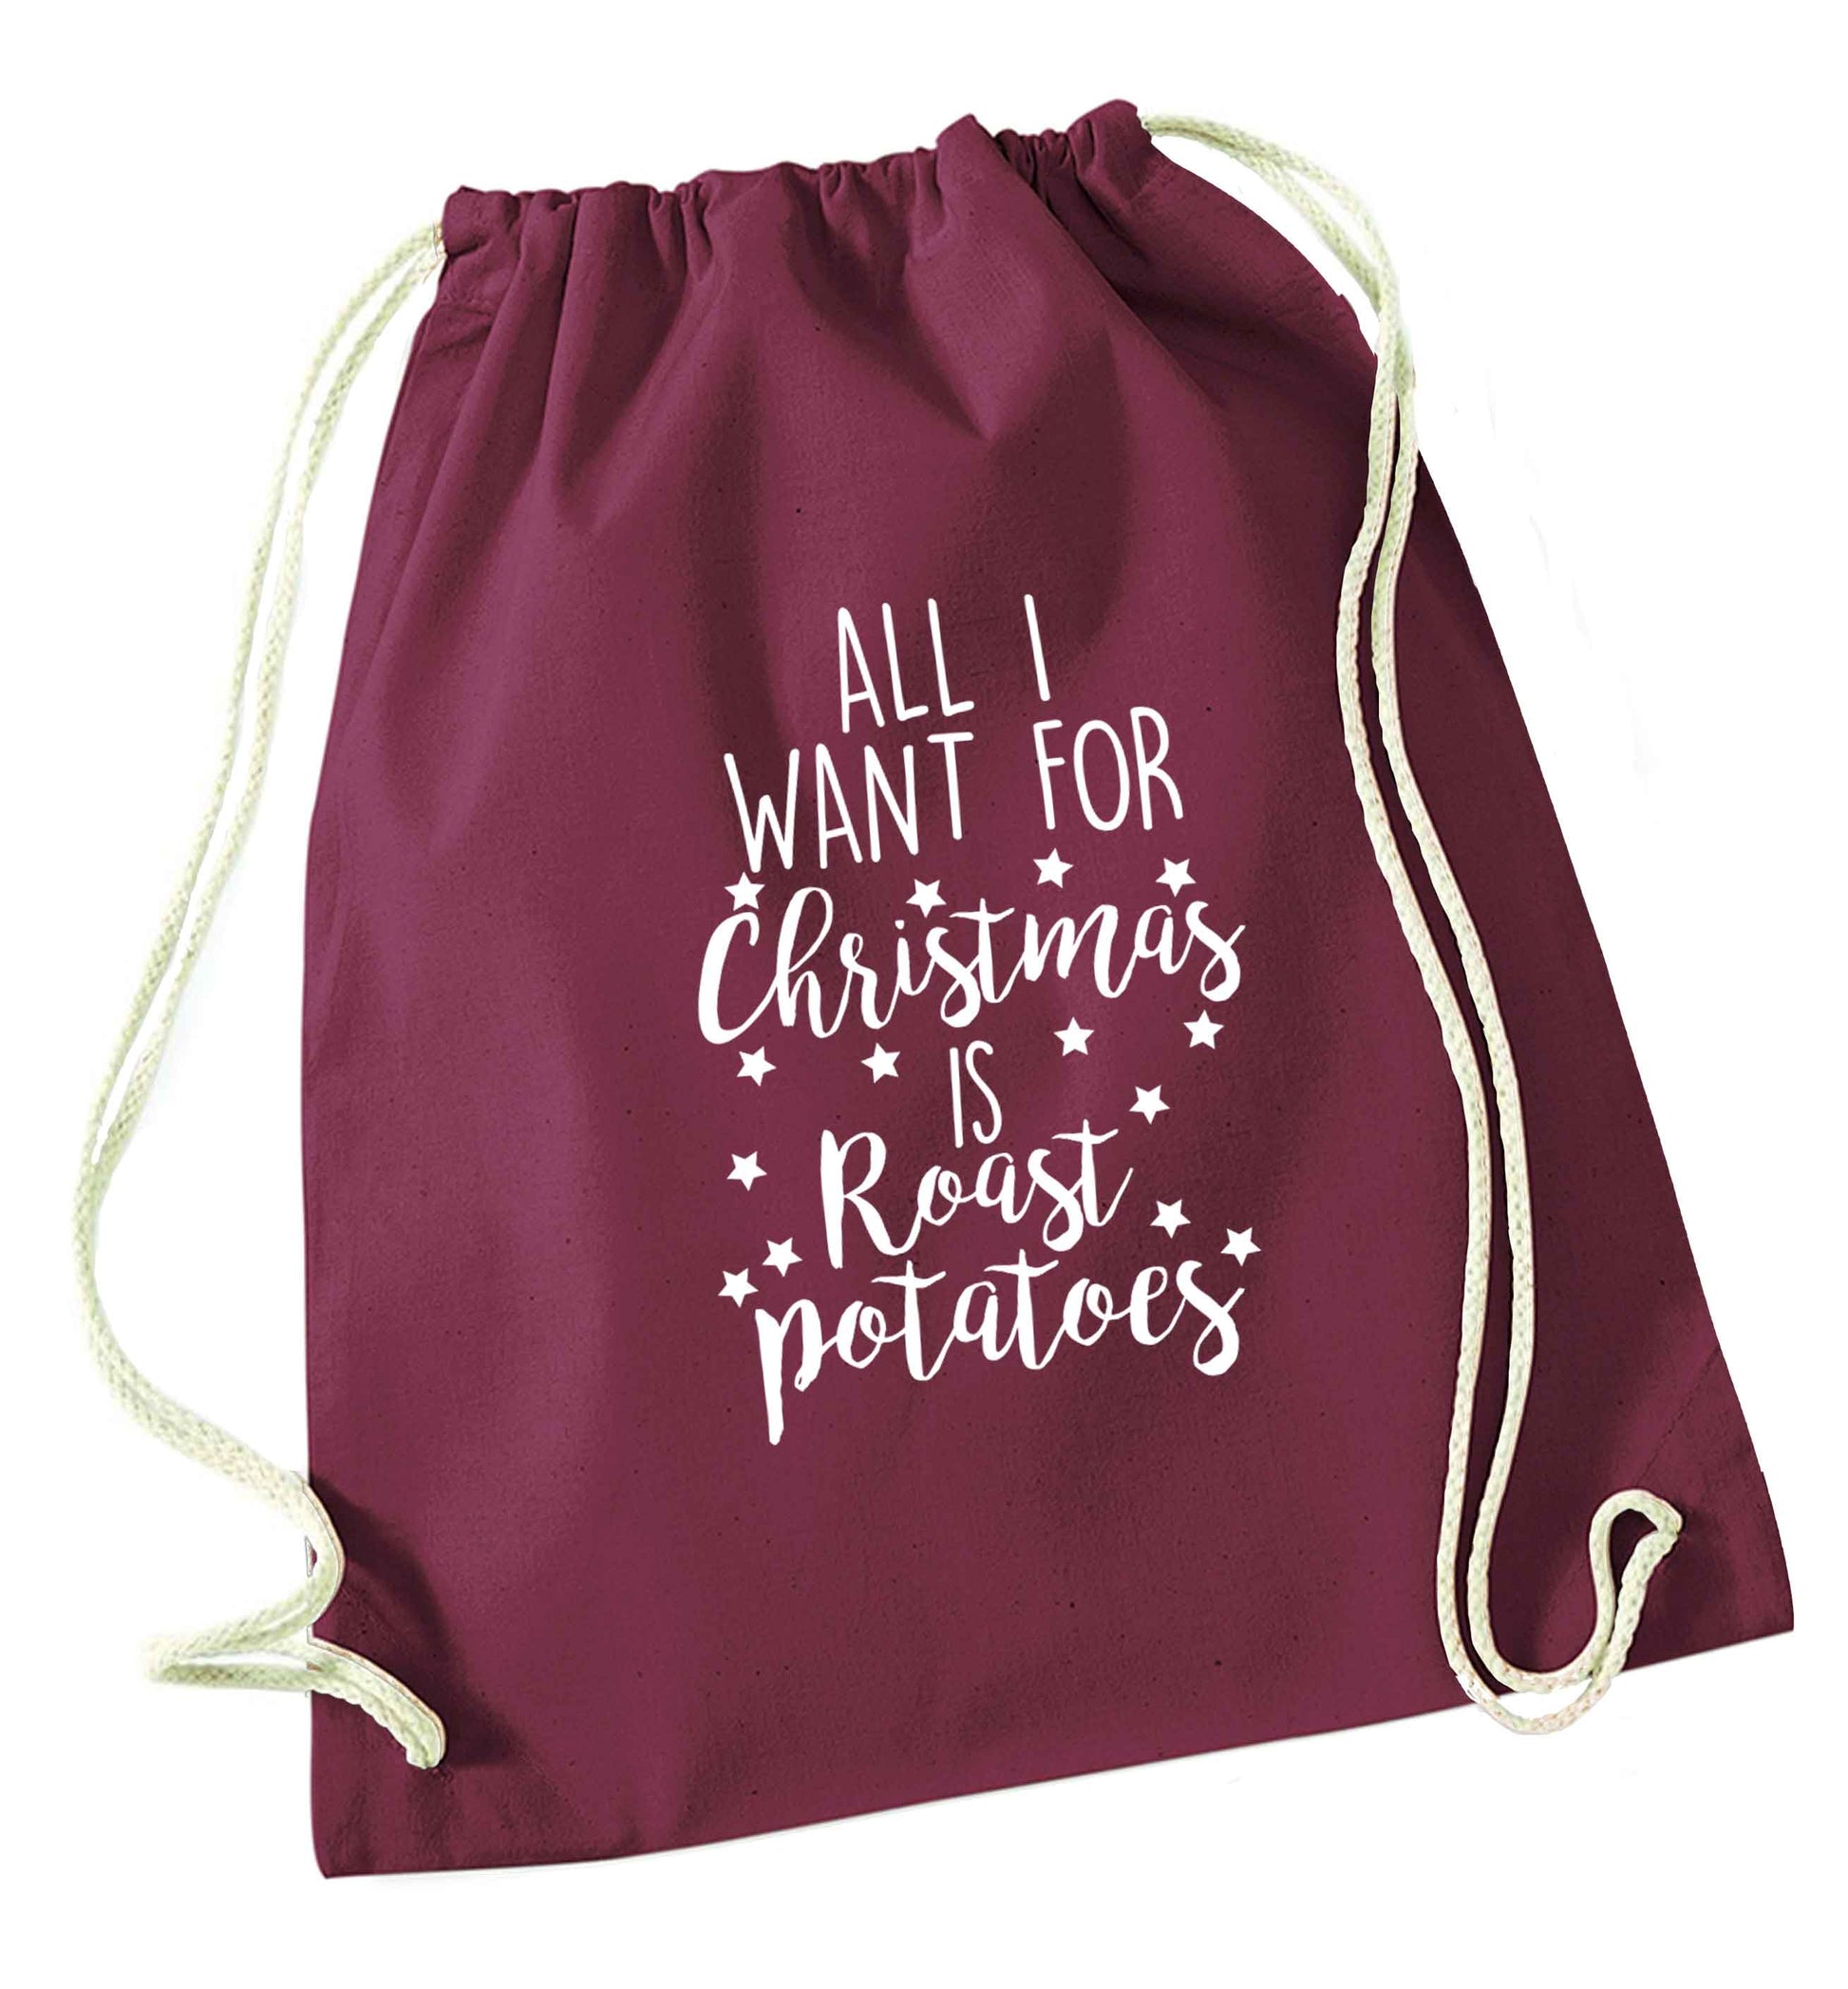 All I want for Christmas is roast potatoes maroon drawstring bag